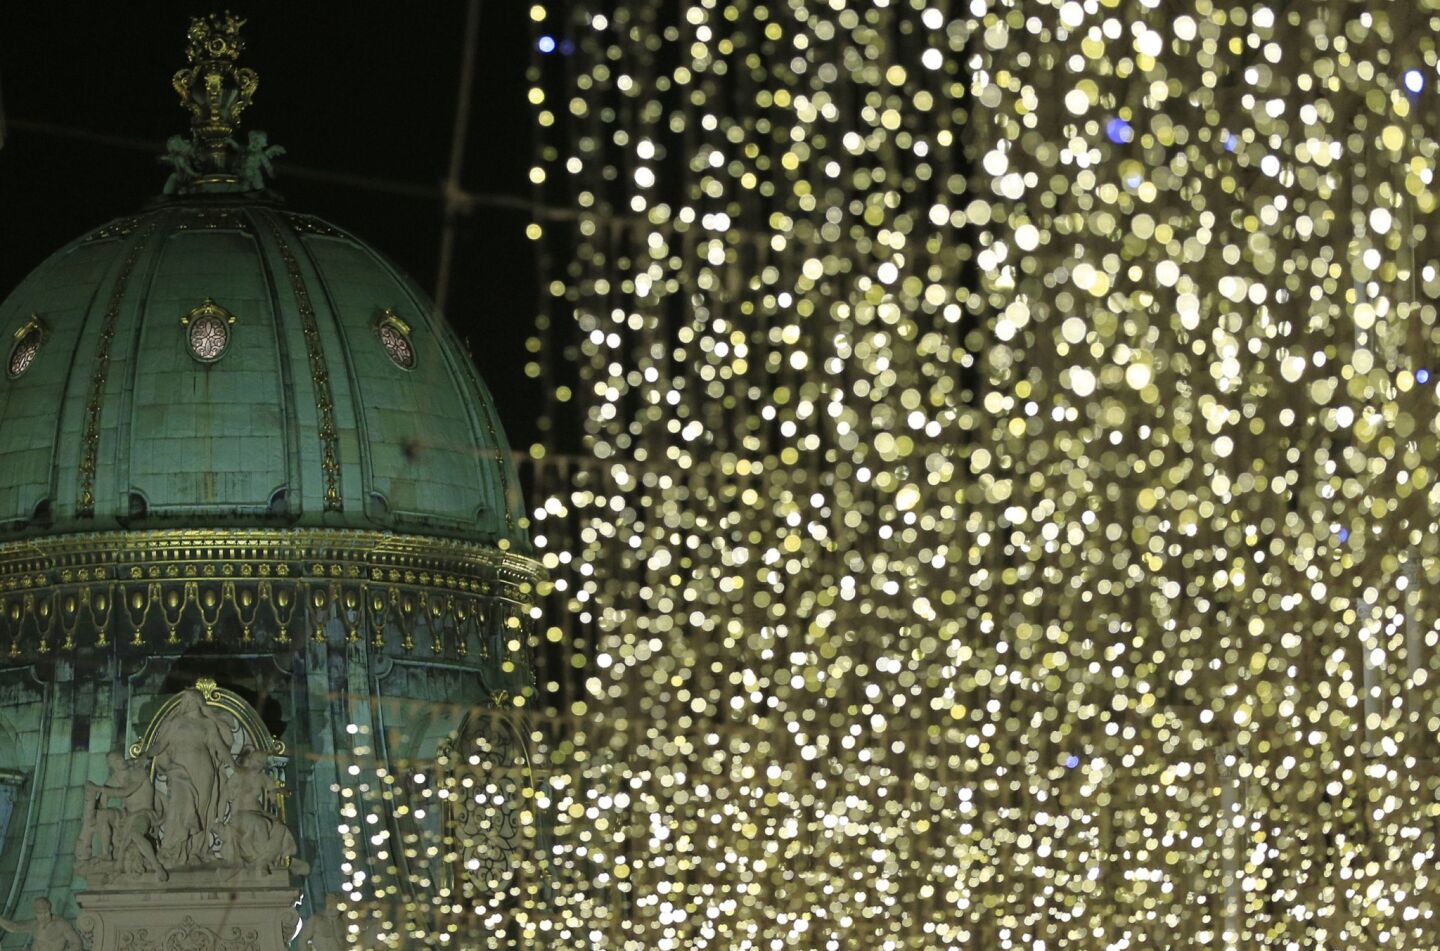 More dazzling Christmas decorations set off the domed Michaelertrakt palace.